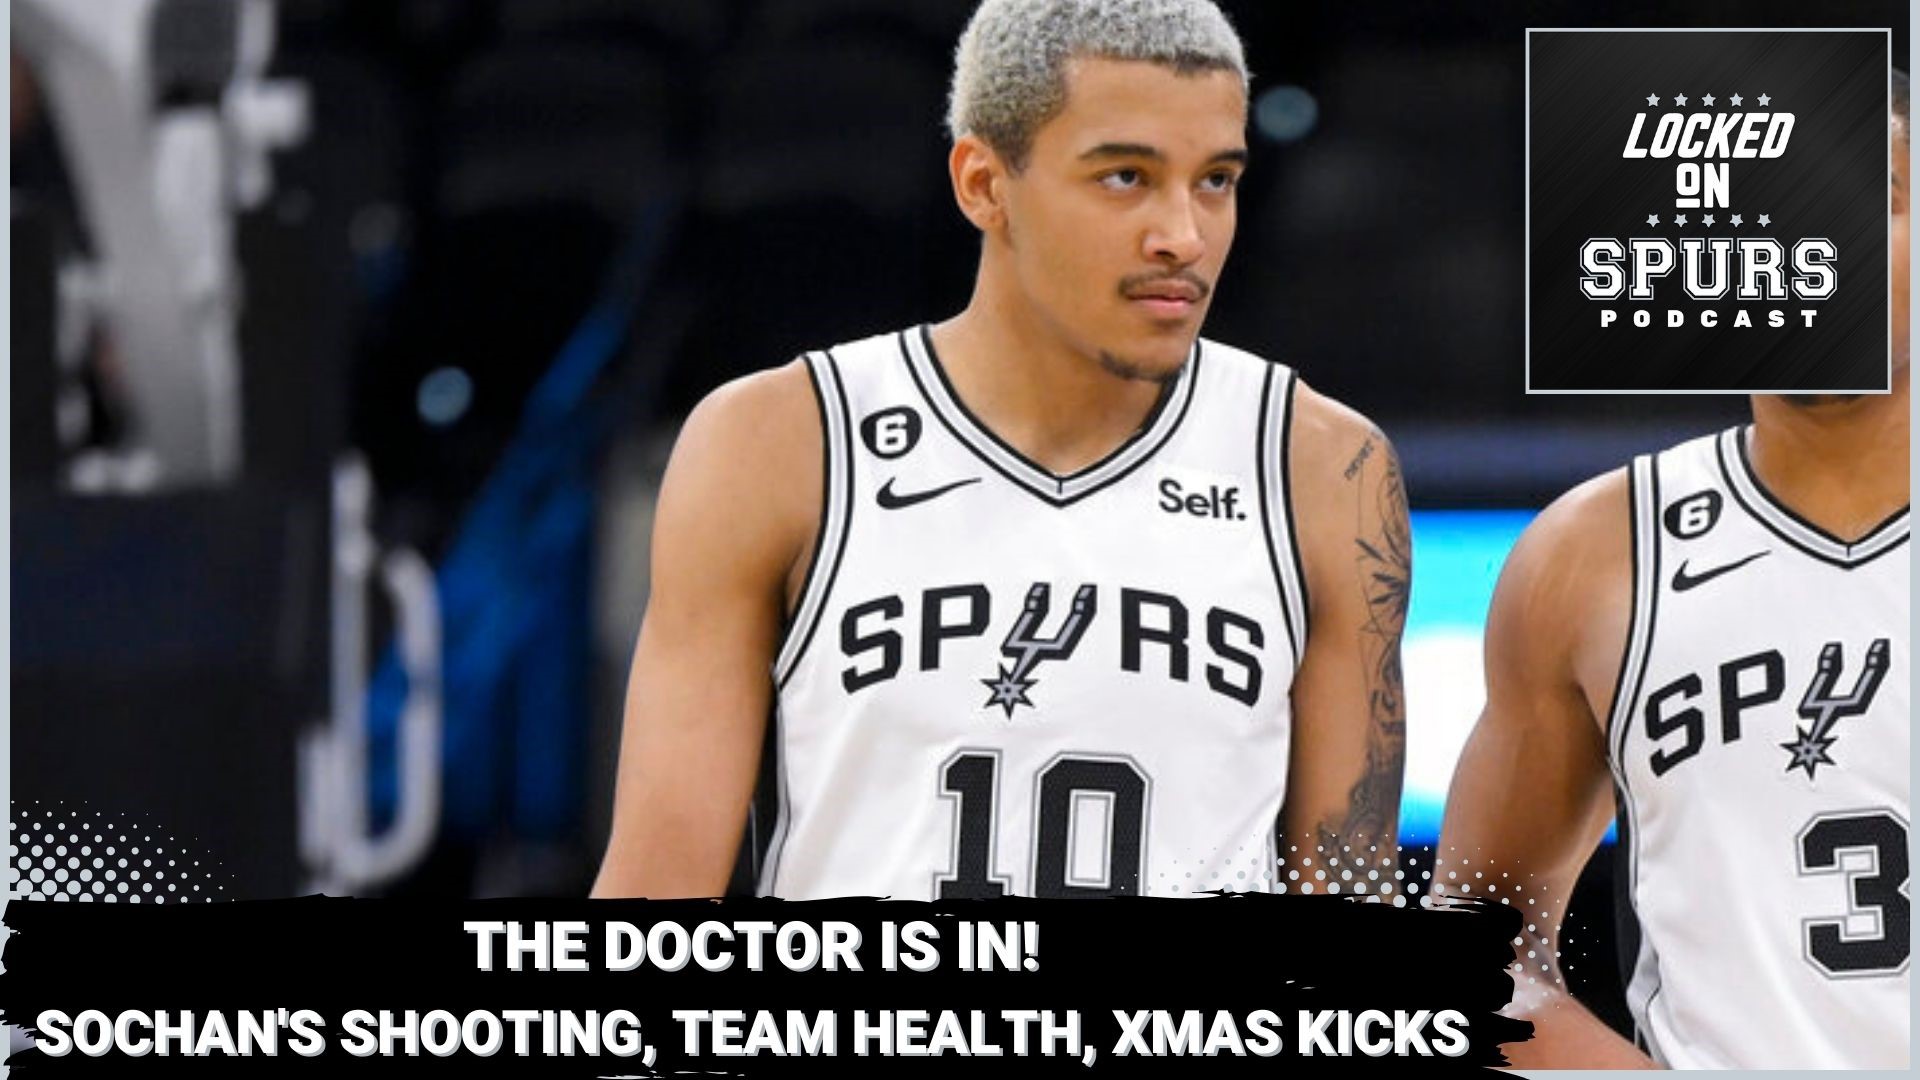 Dr. Ryan McCorkle is back for his weekly visit to talk about the Spurs health and more